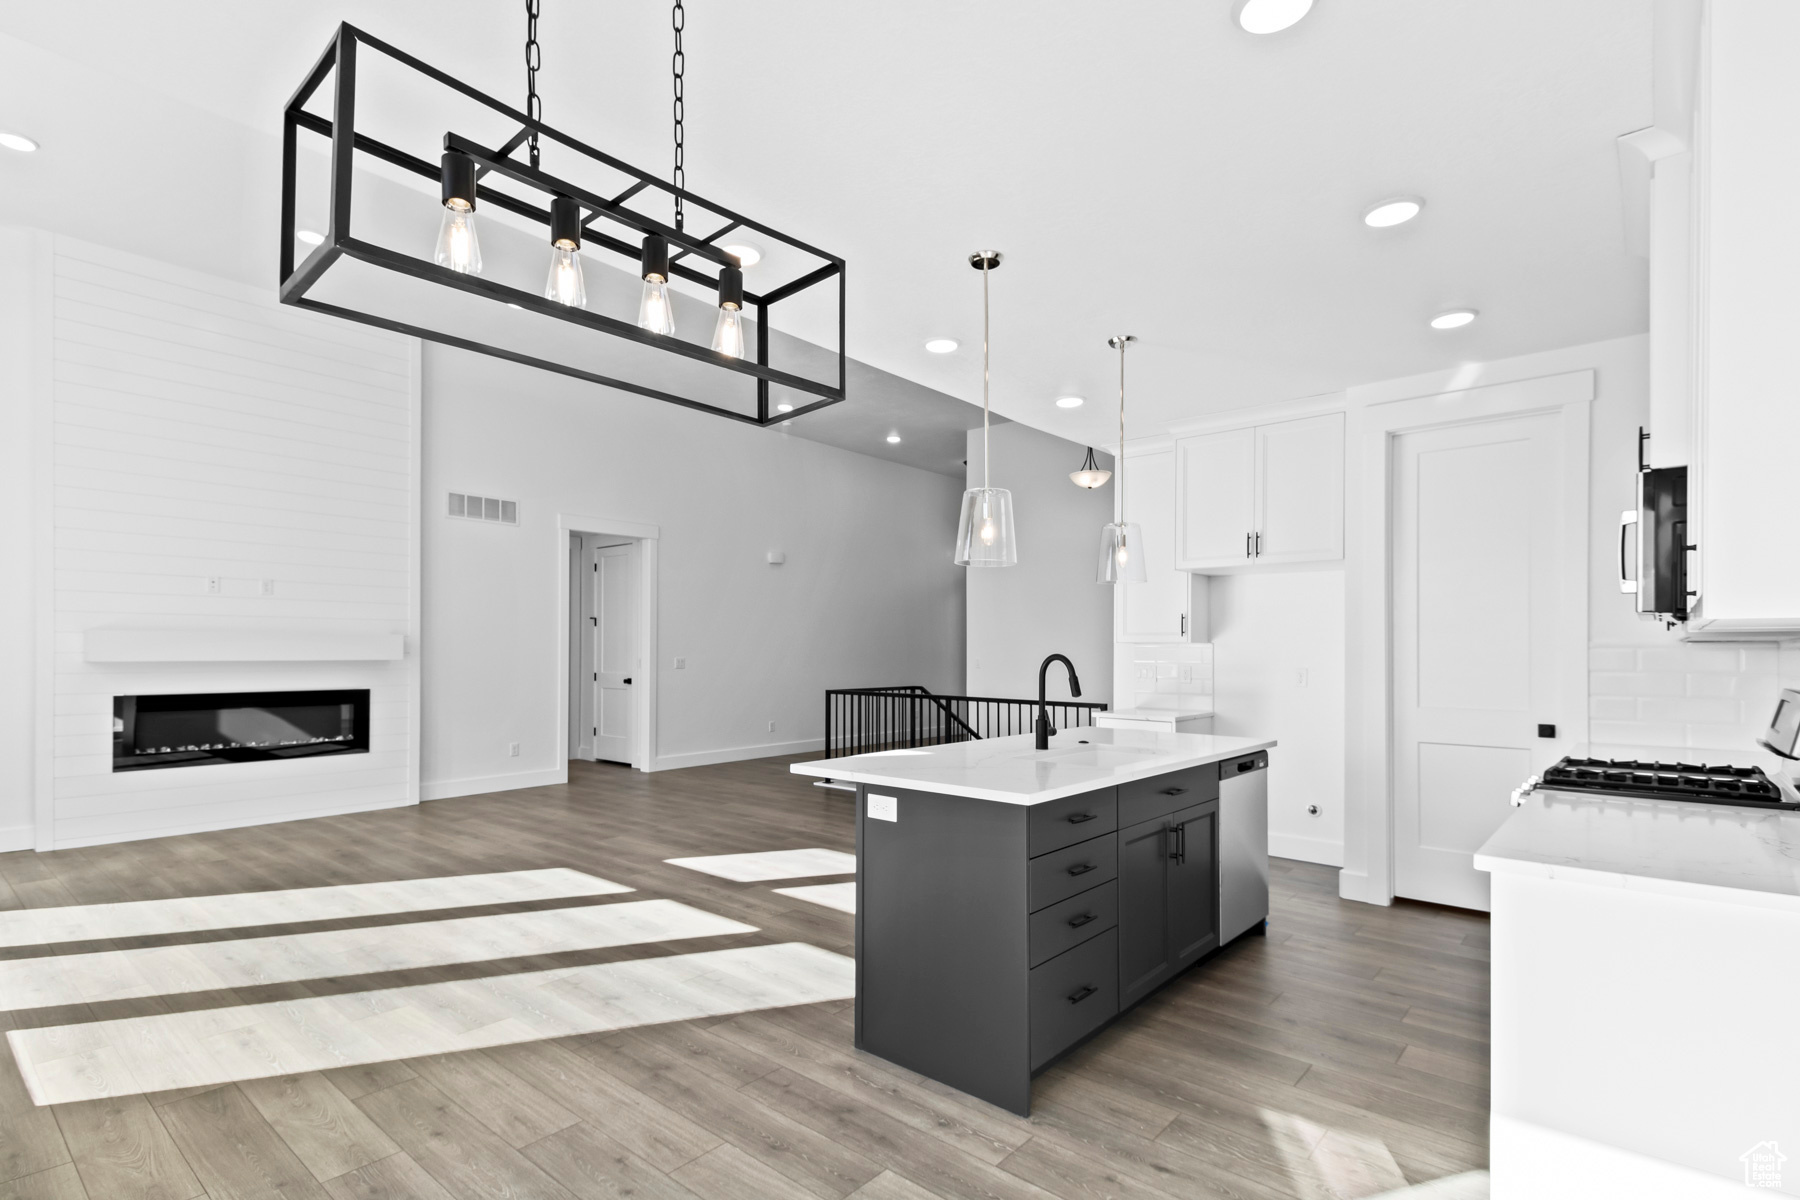 Kitchen with wood-type flooring, hanging light fixtures, gray cabinetry, white cabinetry, and tasteful backsplash